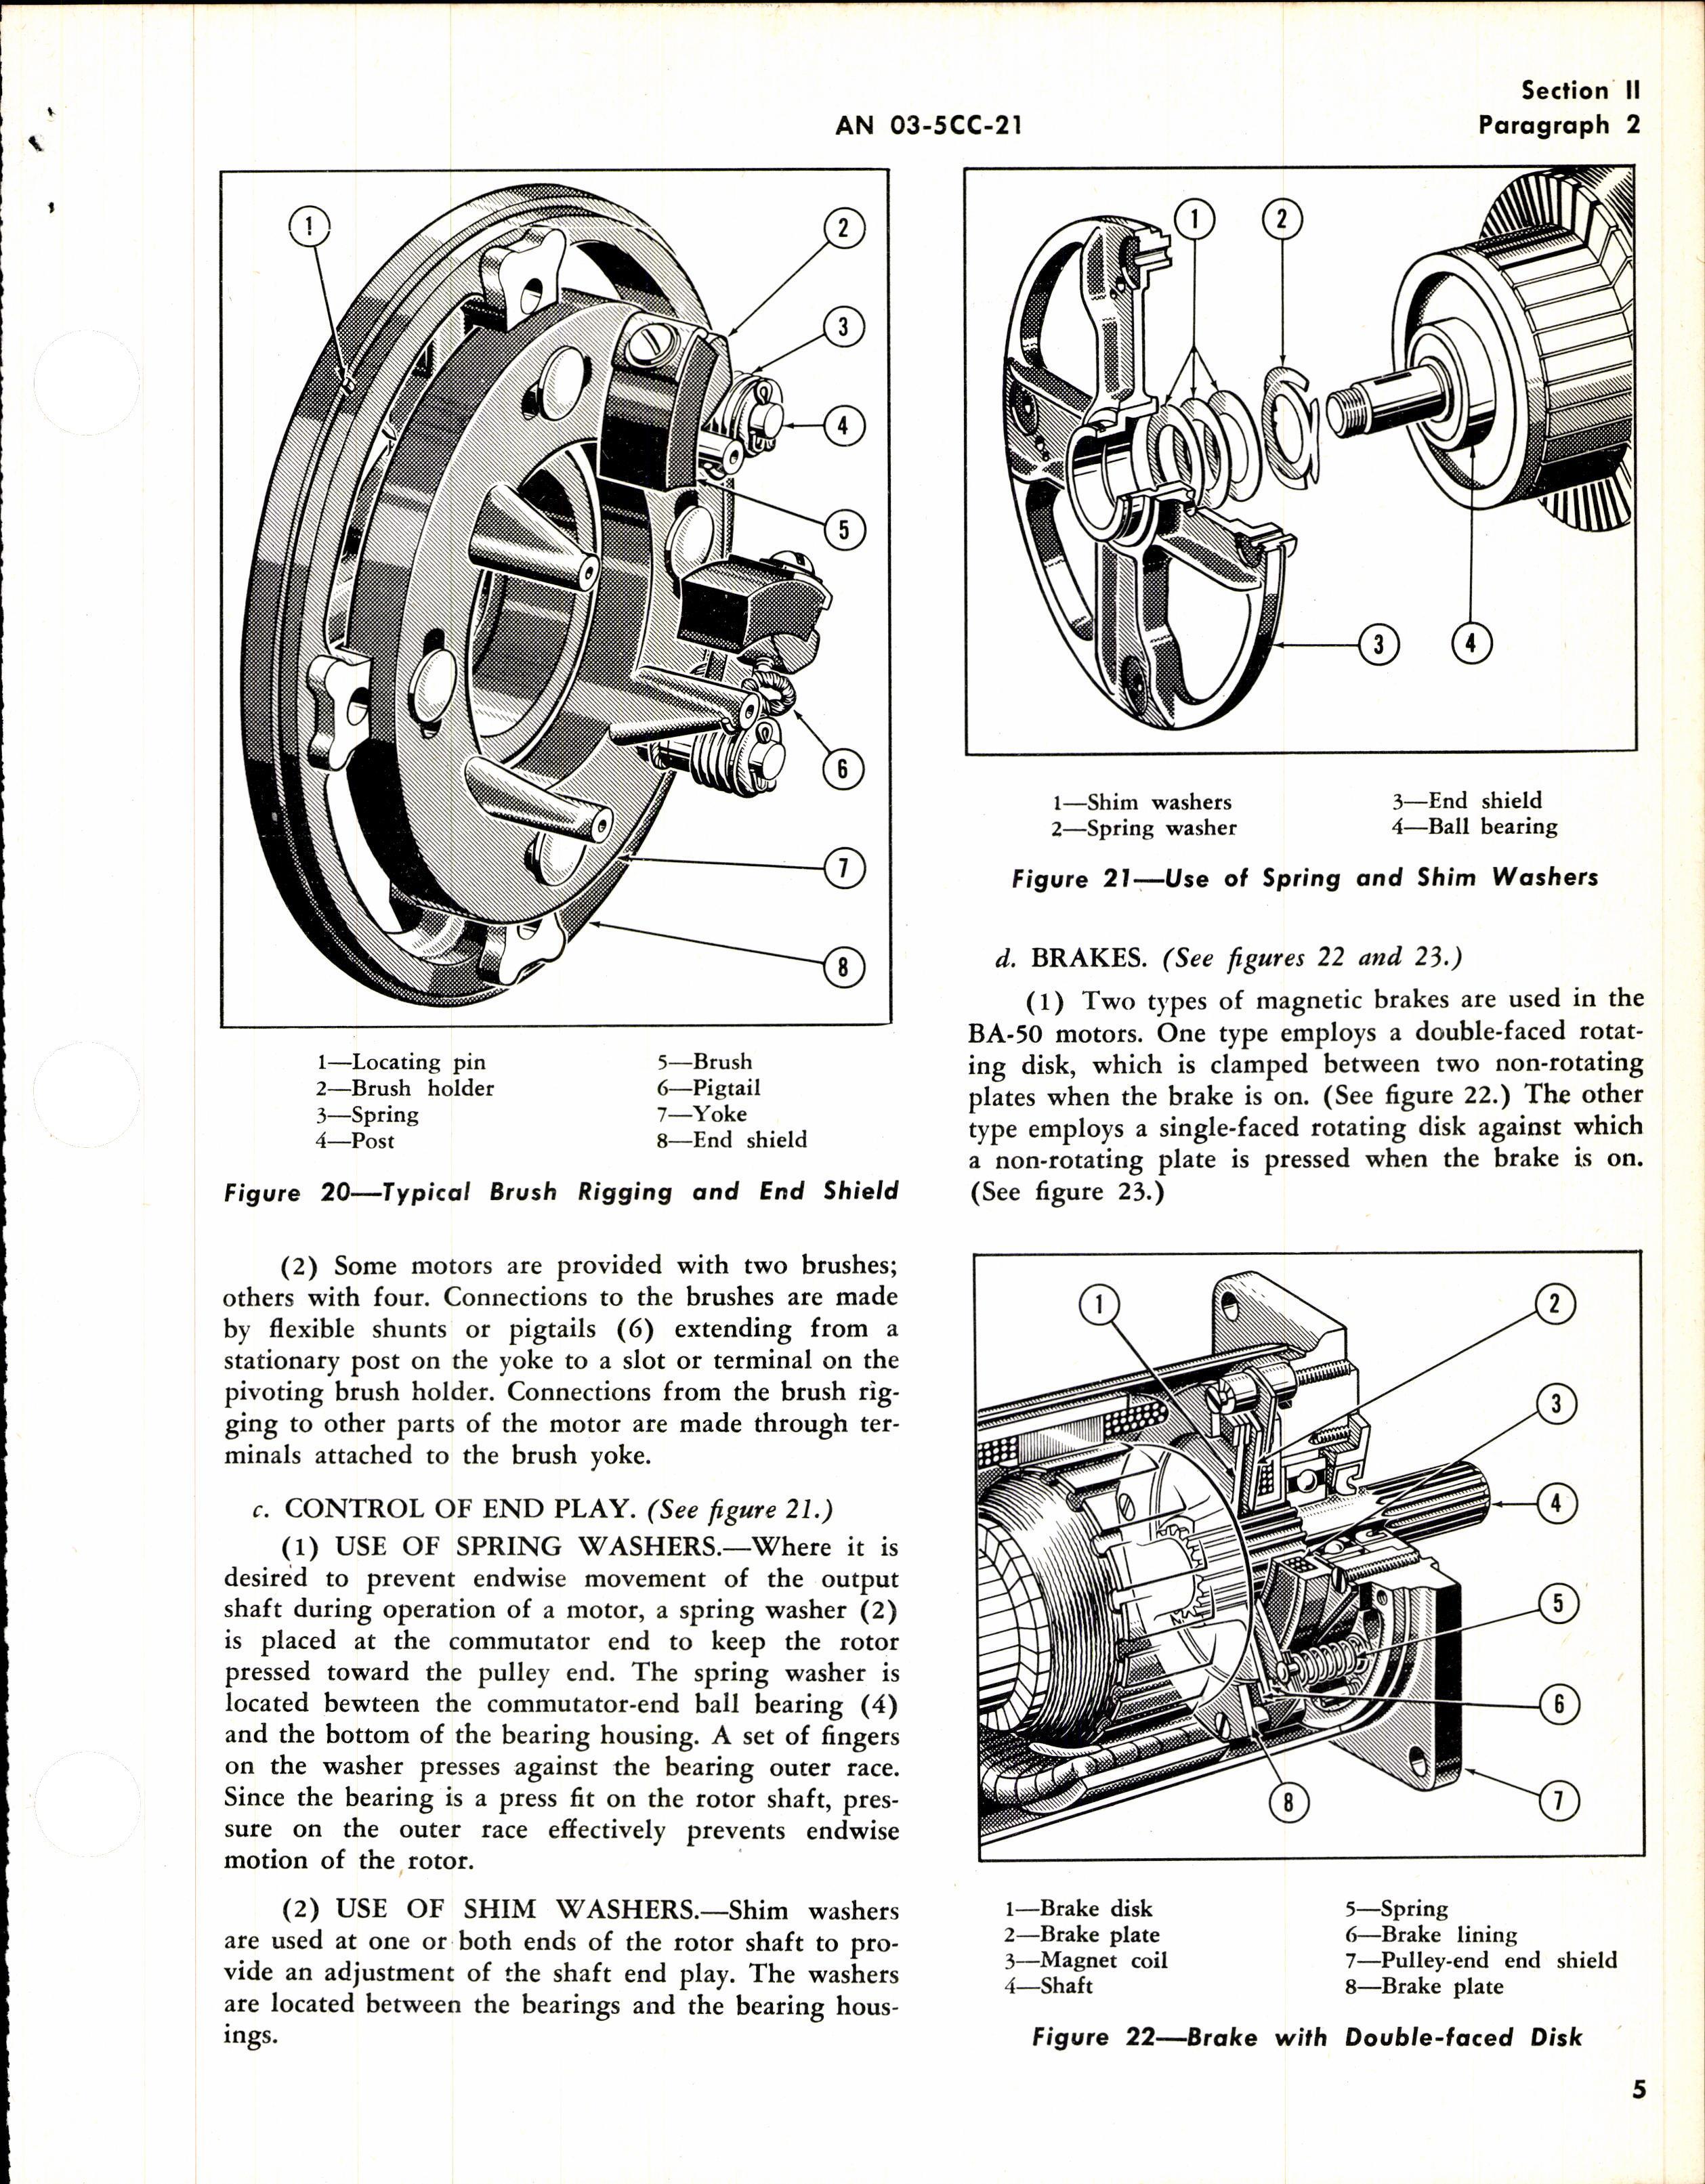 Sample page 7 from AirCorps Library document: Handbook of Instructions with Parts Catalog for Model 5BA50 Series Electric Motors